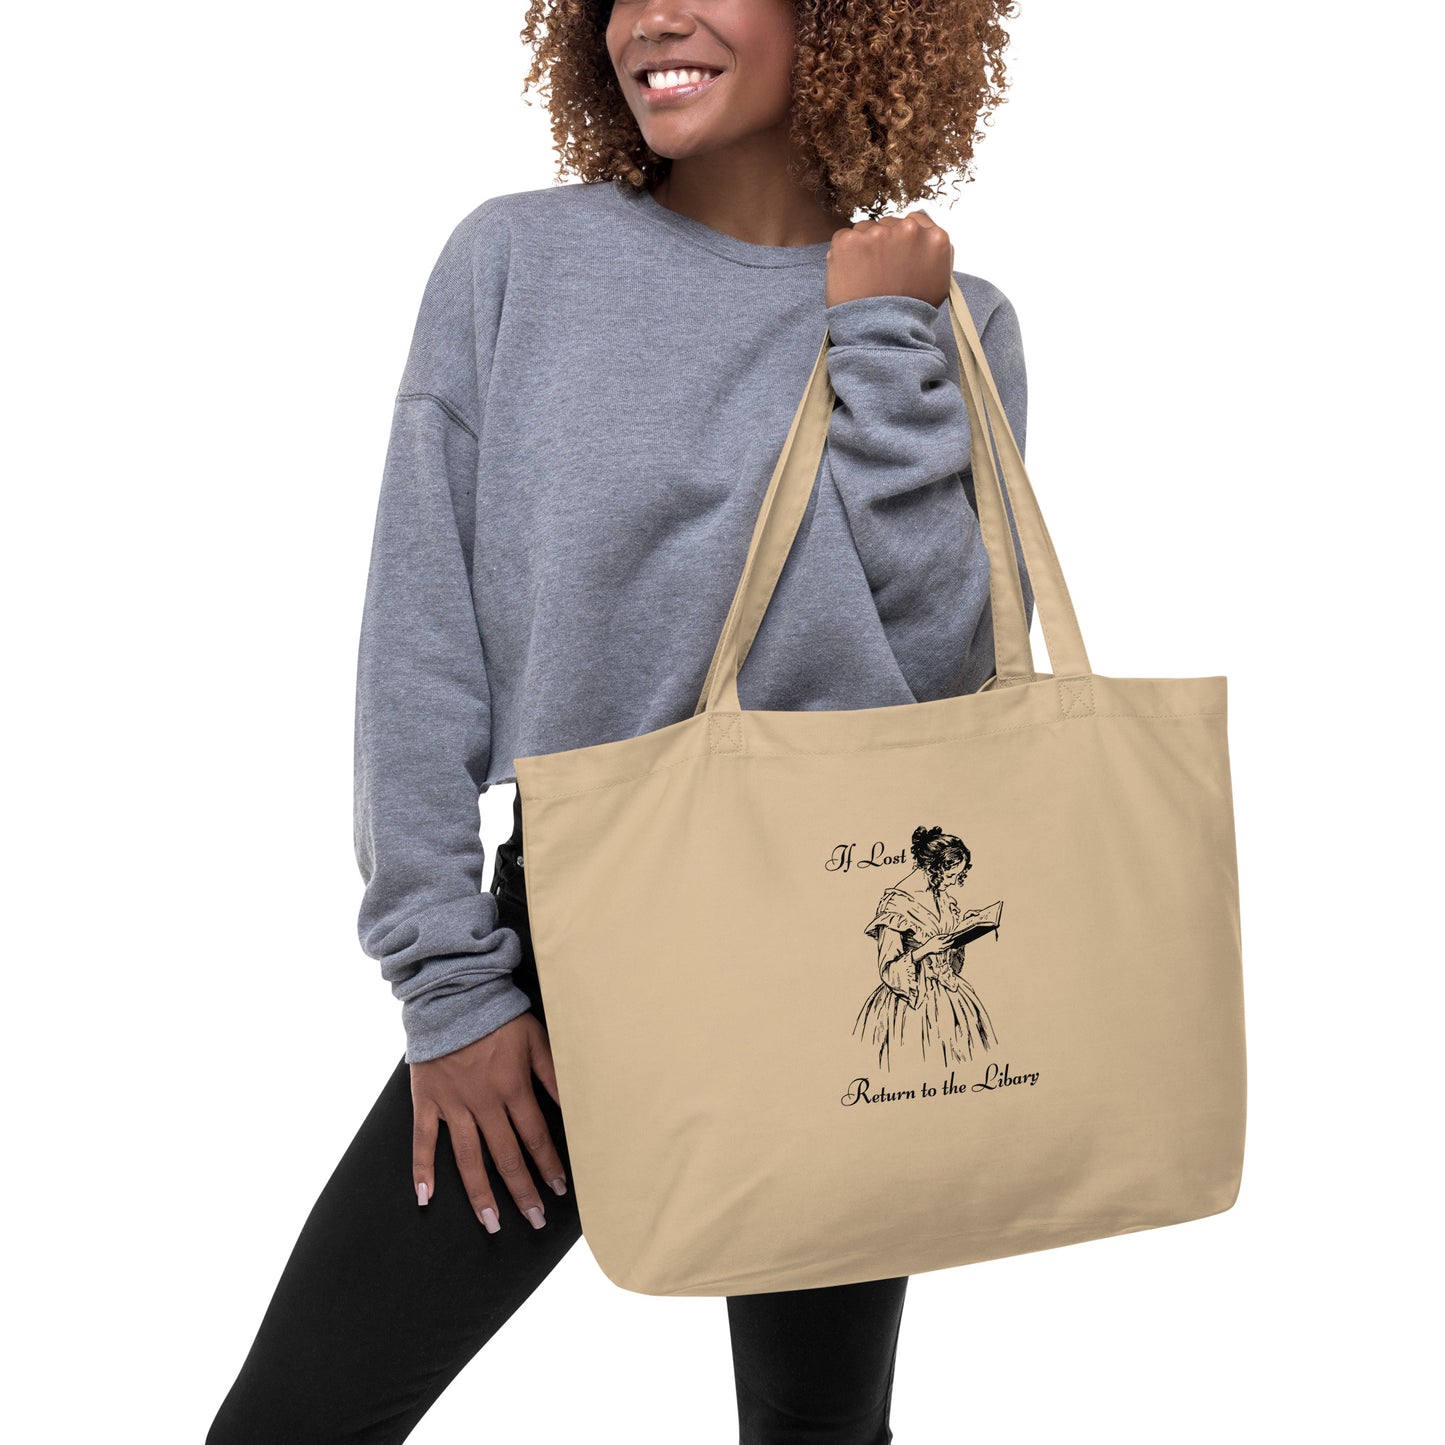 If Lost, Return to the Library Large organic tote bag